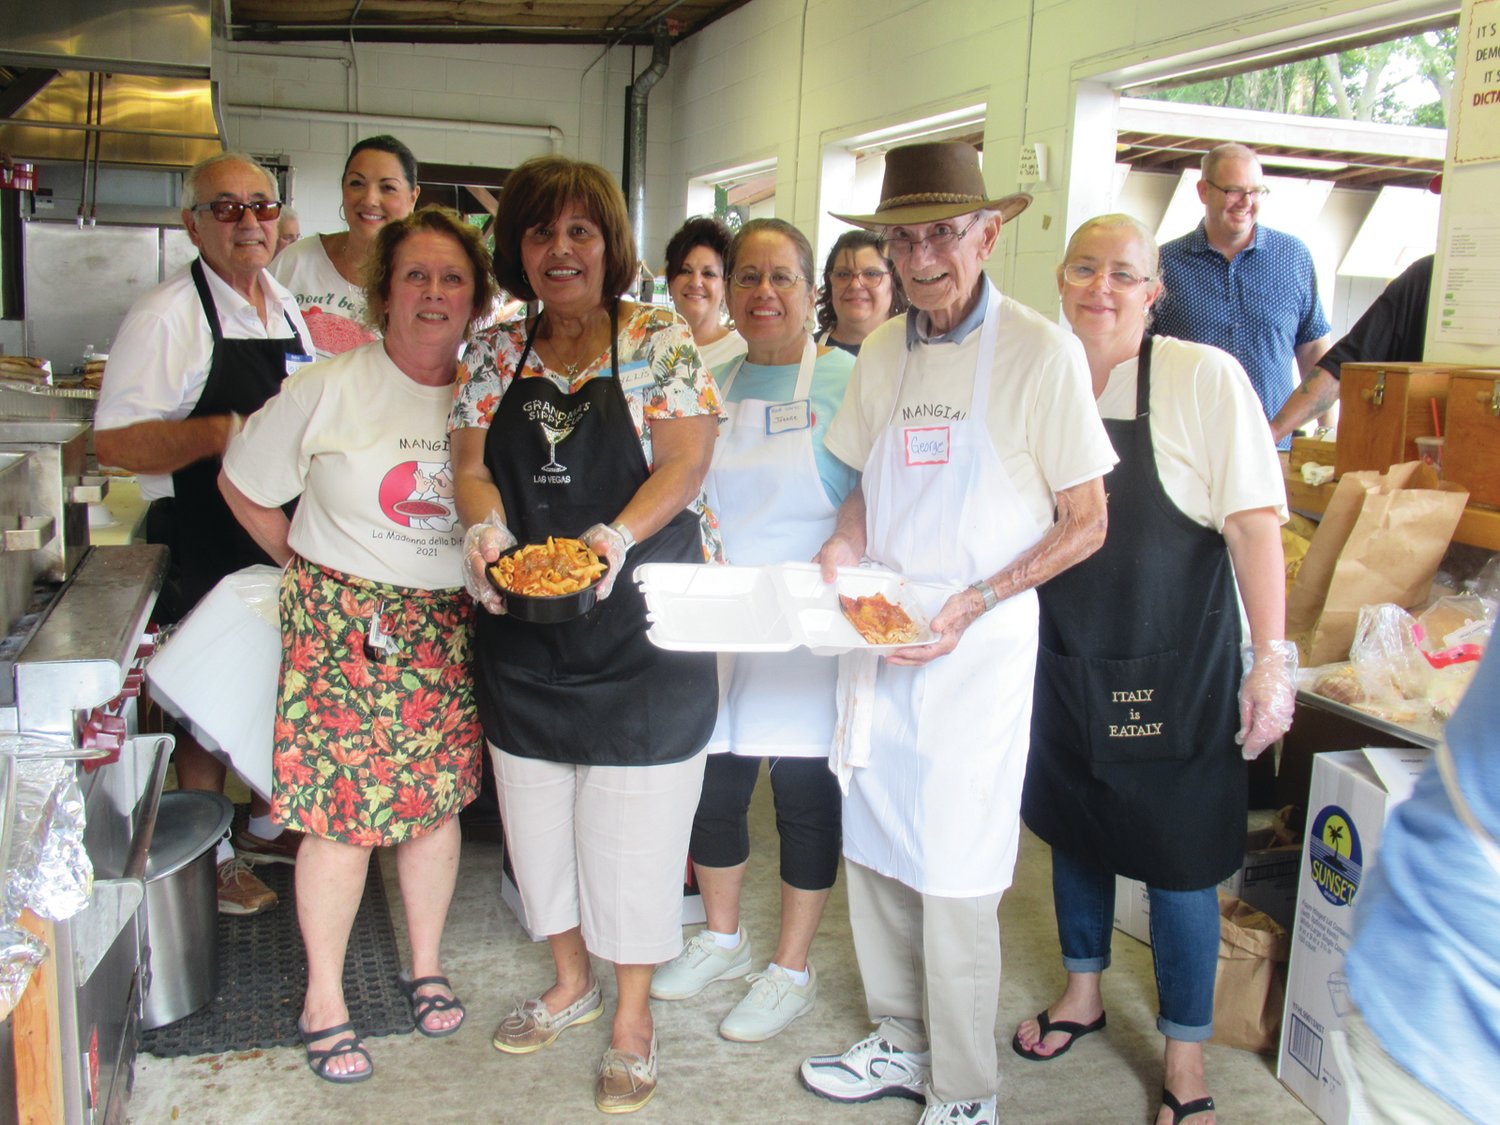 CLASSIC COOKS: These are some of the many dedicated and proud parishioners who performed different kitchen duties during last week’s feast and festival in Johnston.